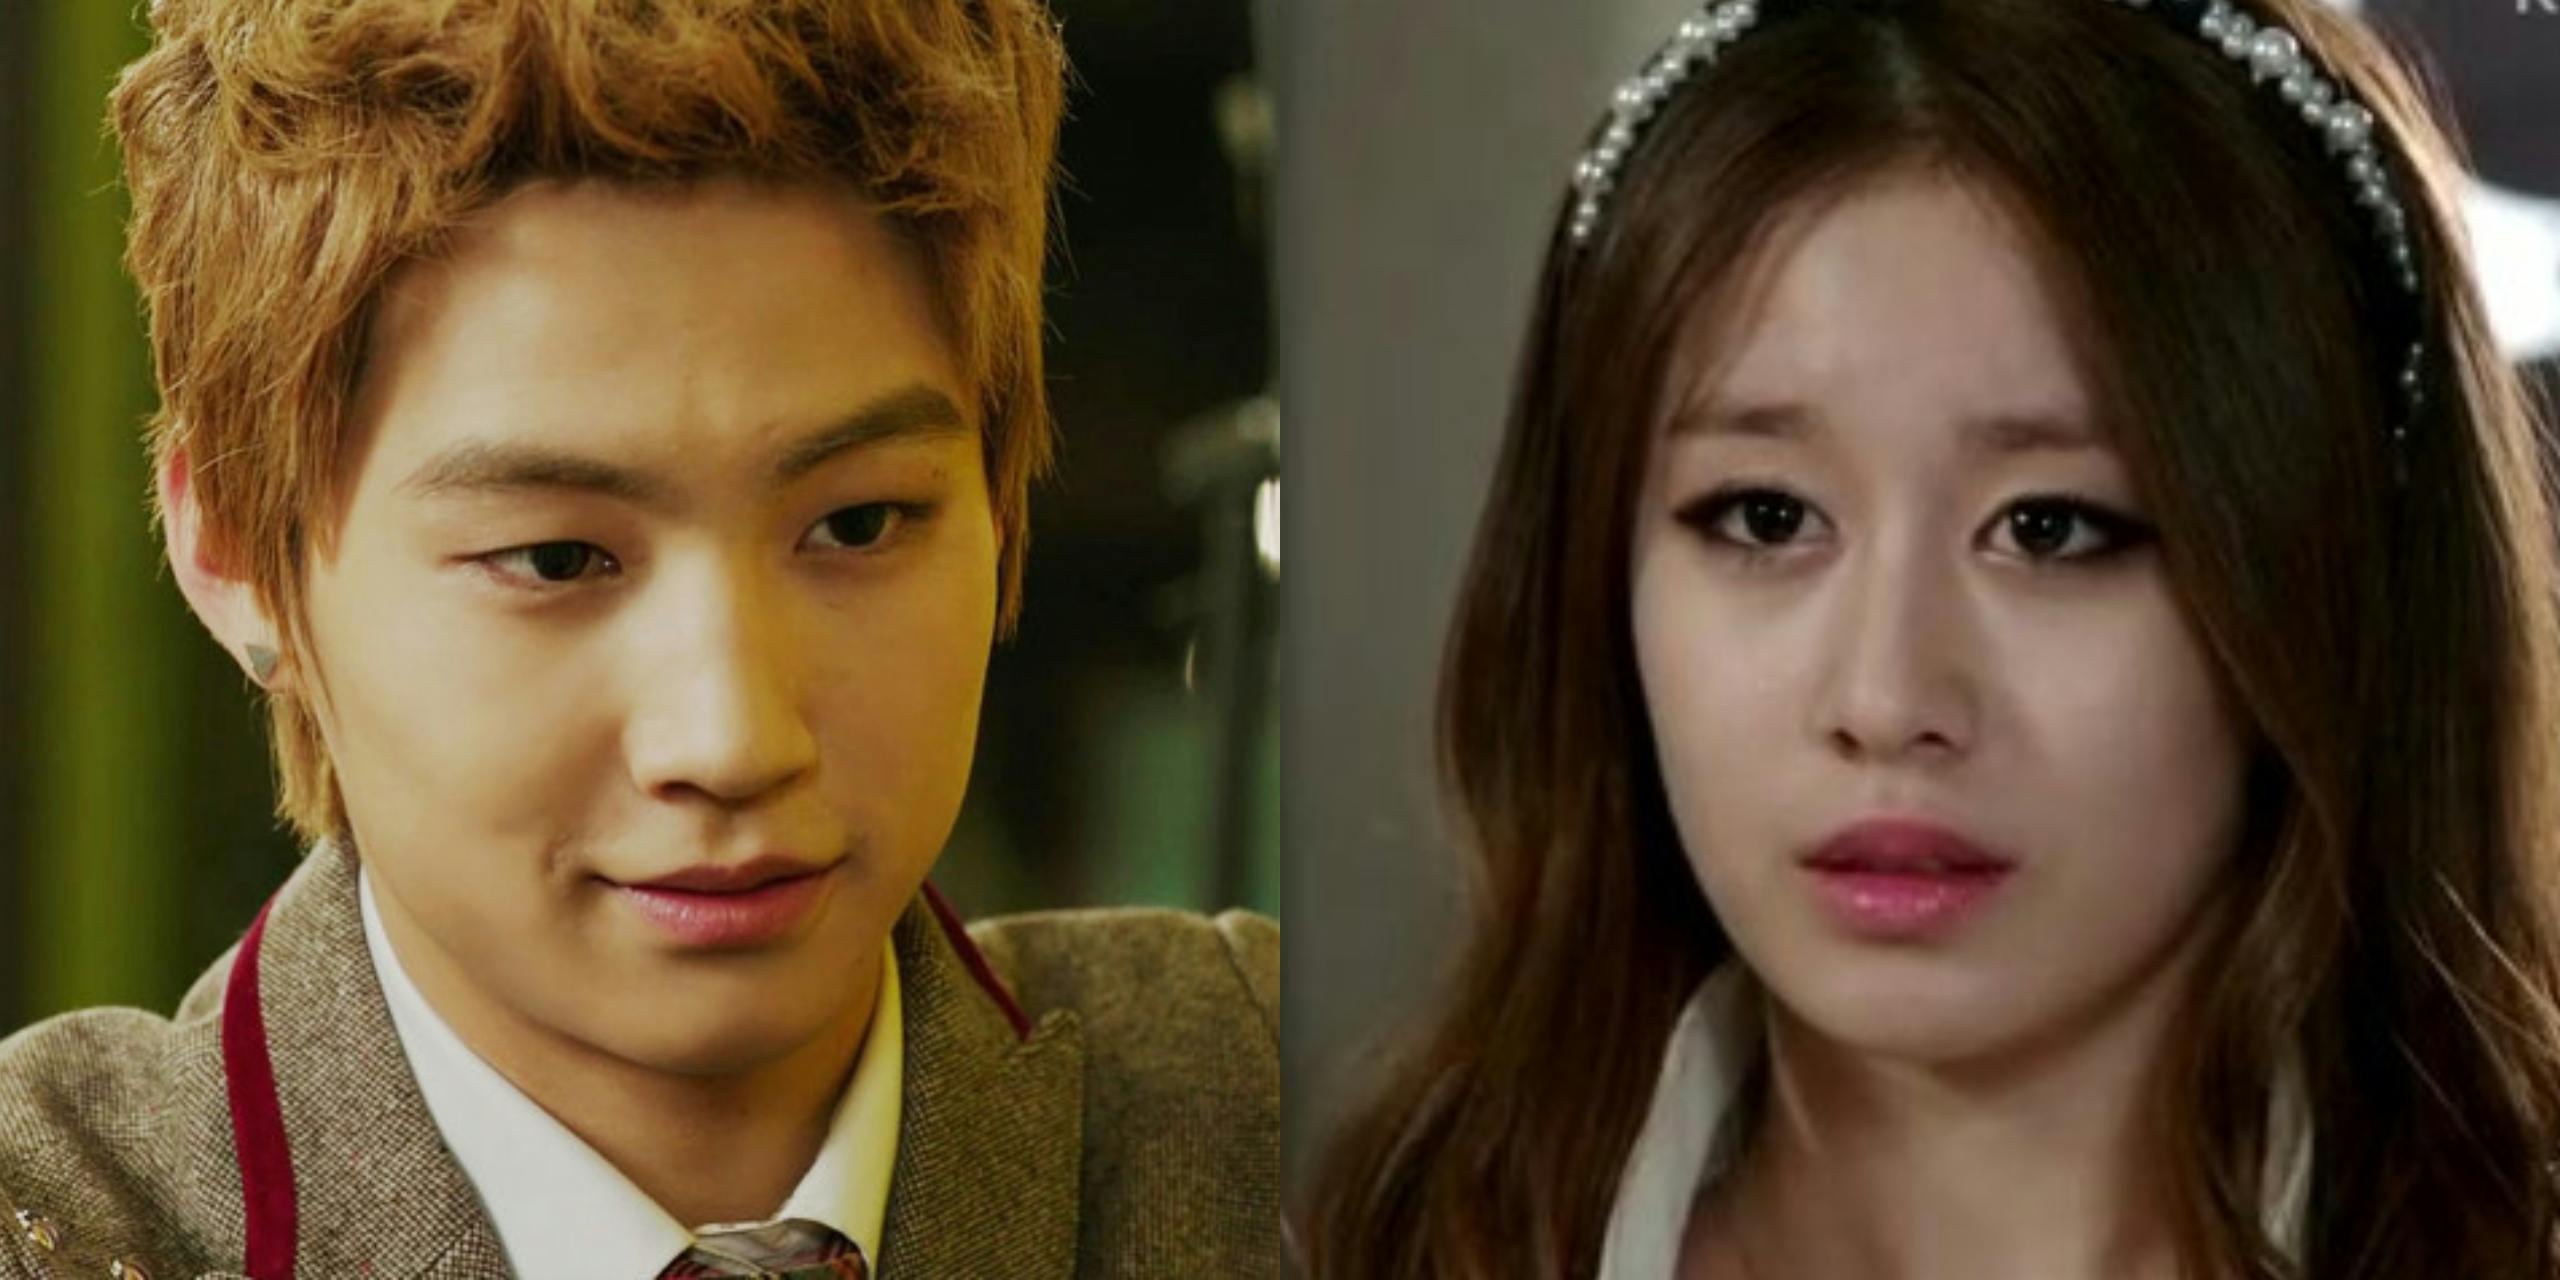 Stars of Dream High 2: Where Are They Now?